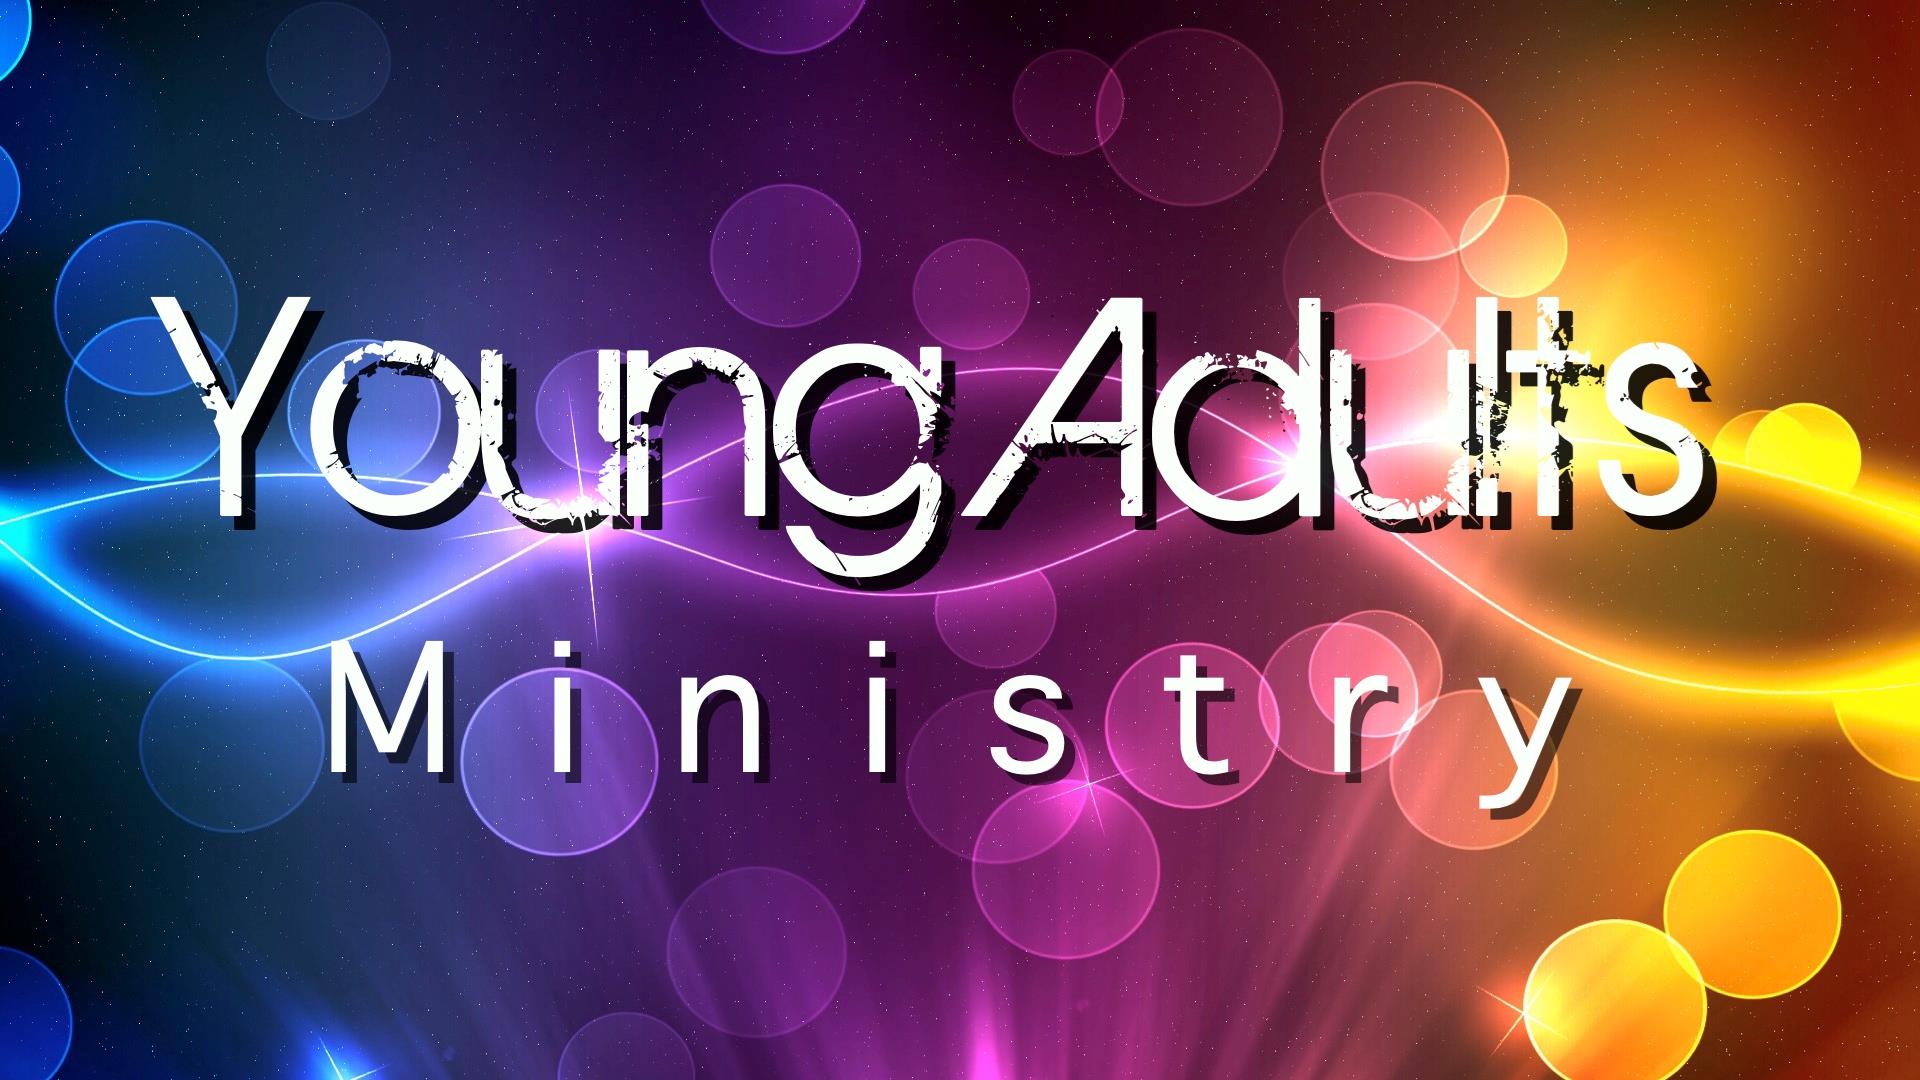 YOUNG ADULT MINISTRY